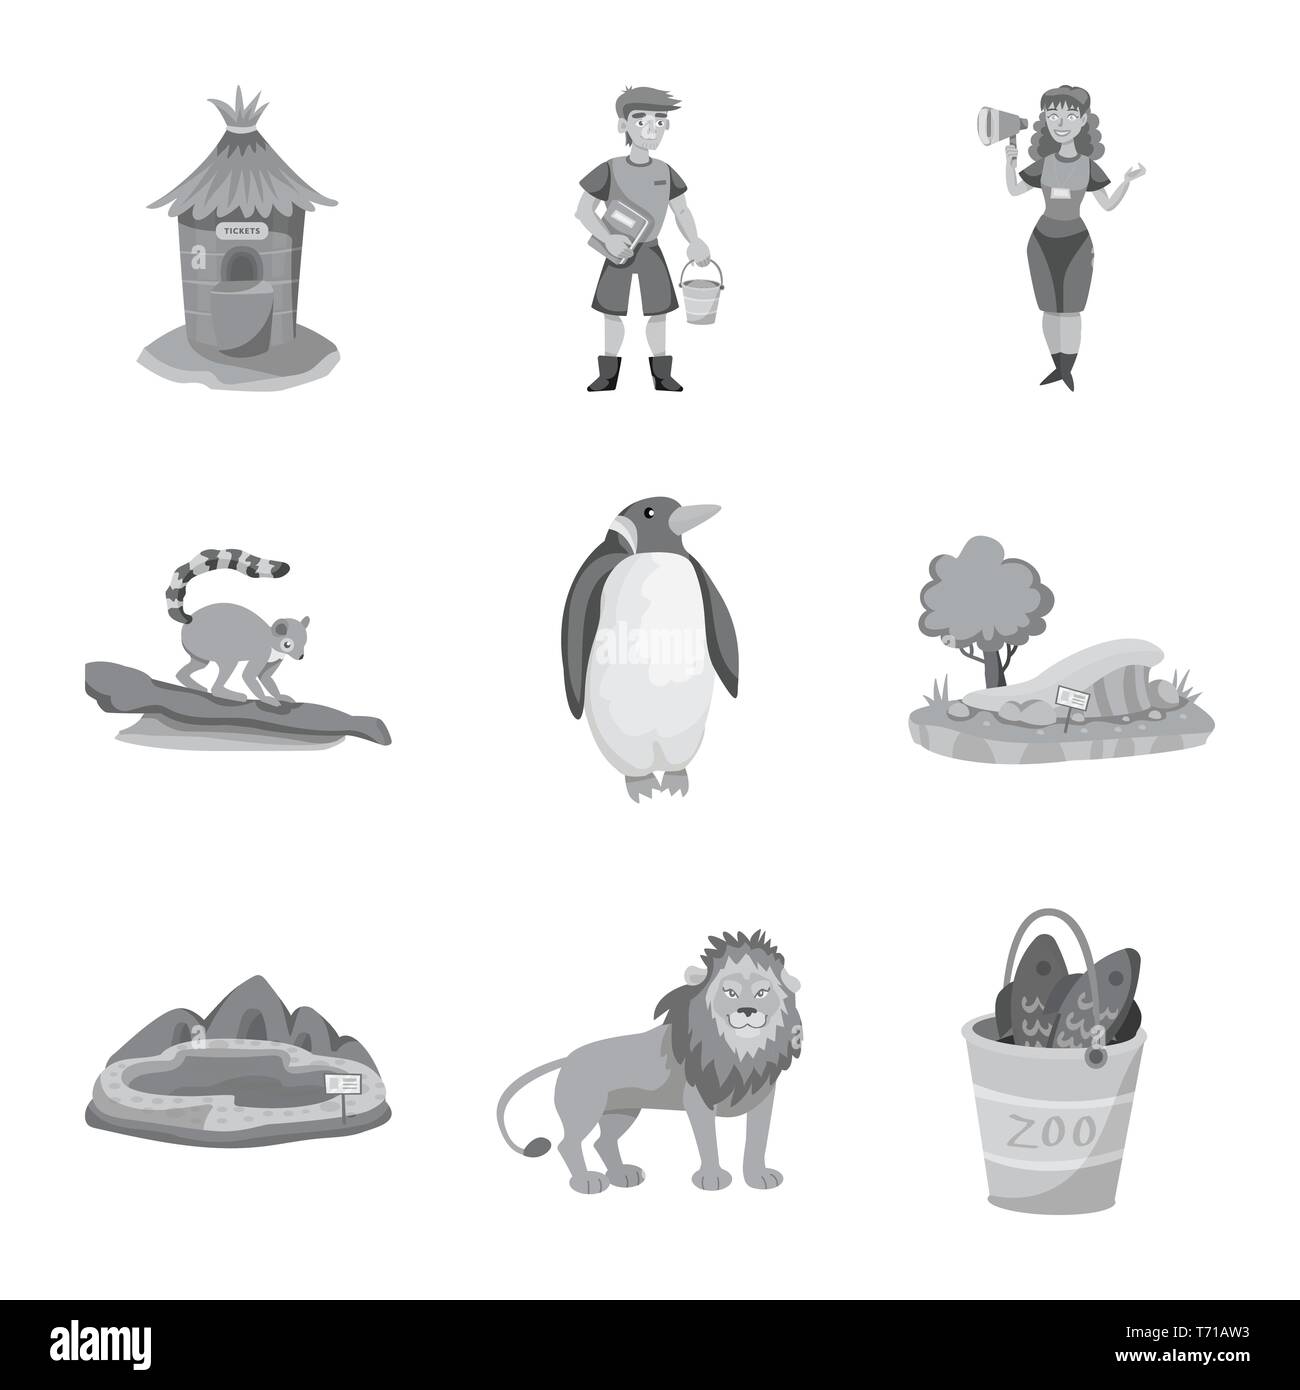 window,zookeeper,lemur,penguin,trees,lake,lion,bucket,counter,man,woman,monkey,white,sand,pool,cute,fish,box,utensil,sloth,christmas,landscape,pond,head,pike,queue,clothes,tail,zoo,park,safari,animal,nature,fun,fauna,entertainment,forest,flora,set,vector,icon,illustration,isolated,collection,design,element,graphic,sign,mono,gray Vector Vectors , Stock Vector